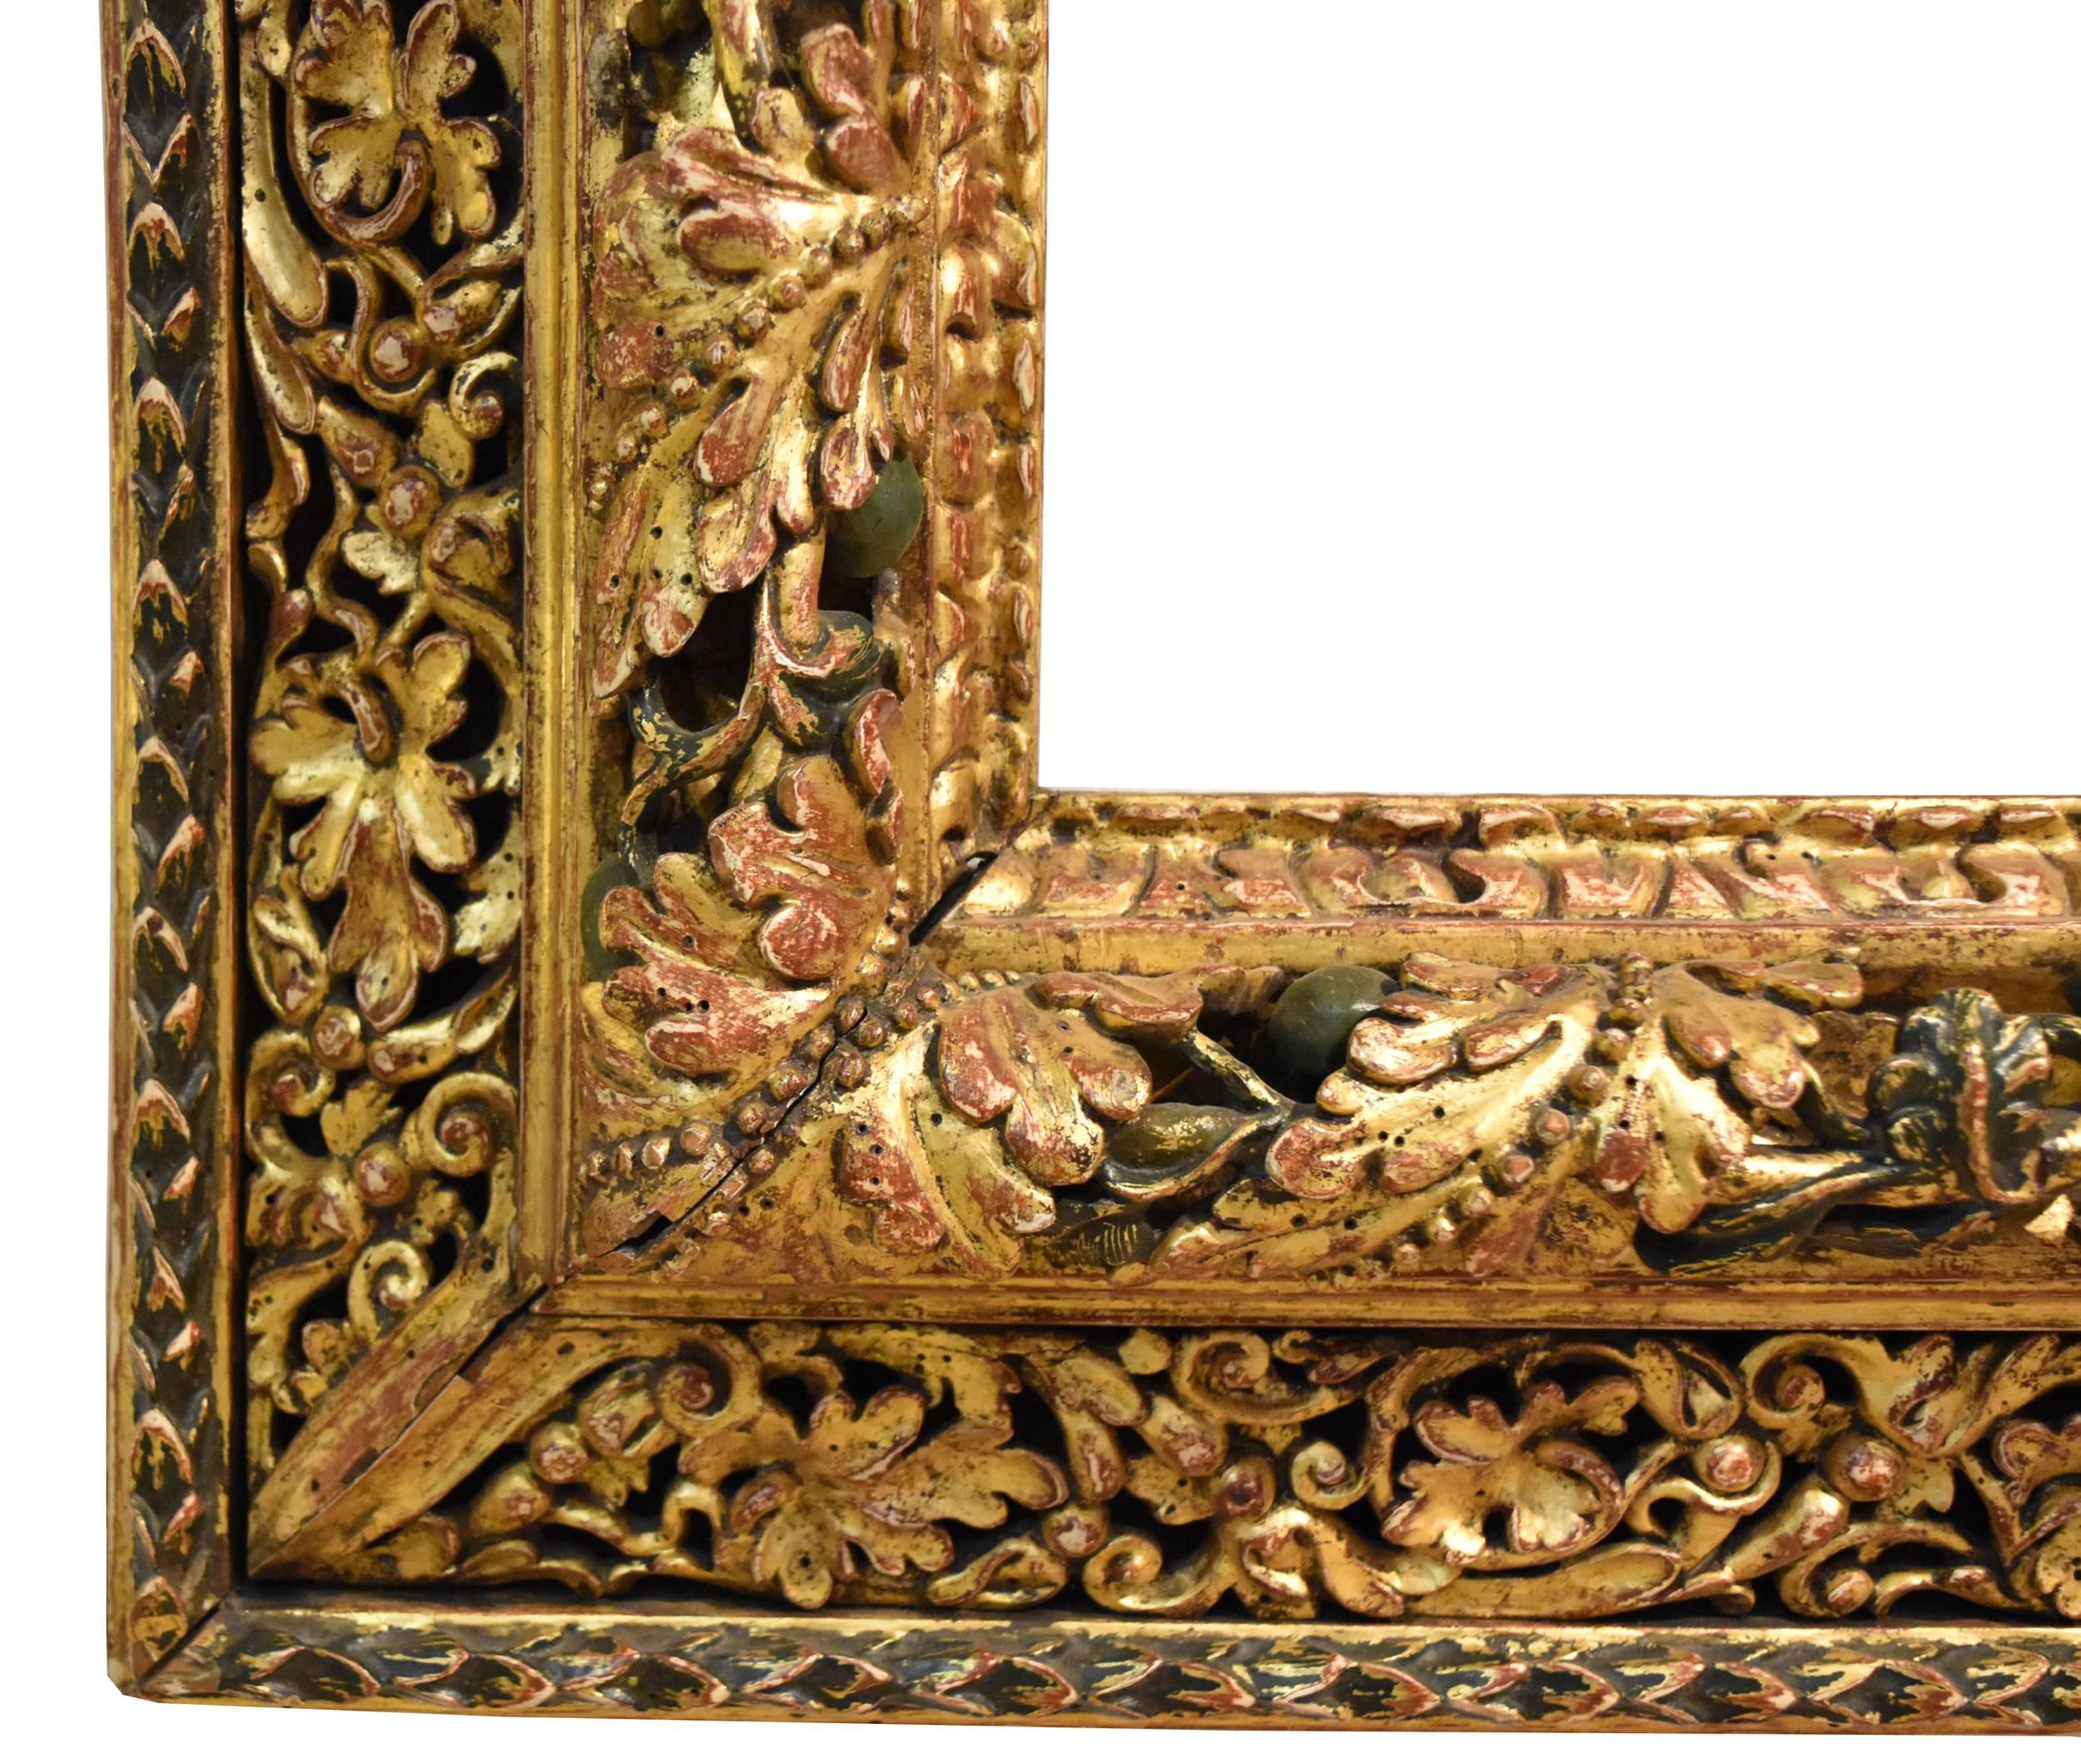 Frame of the 19th century.

External dimensions: 100 x 80cm
Interior dimensions: 78 x 57cm.